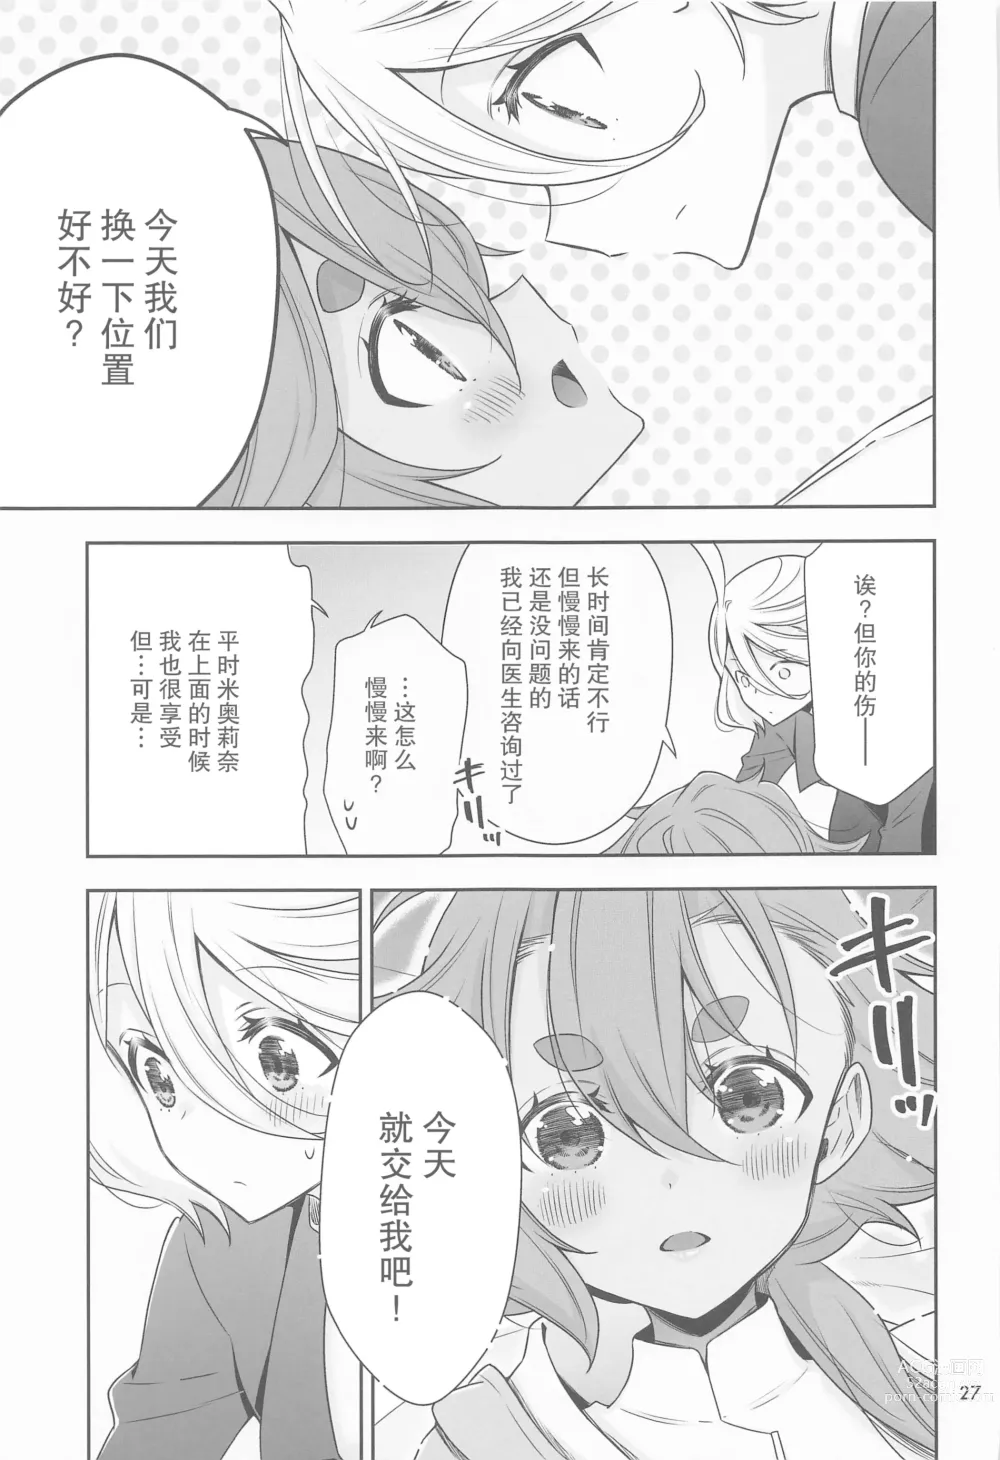 Page 26 of doujinshi 祝福之日